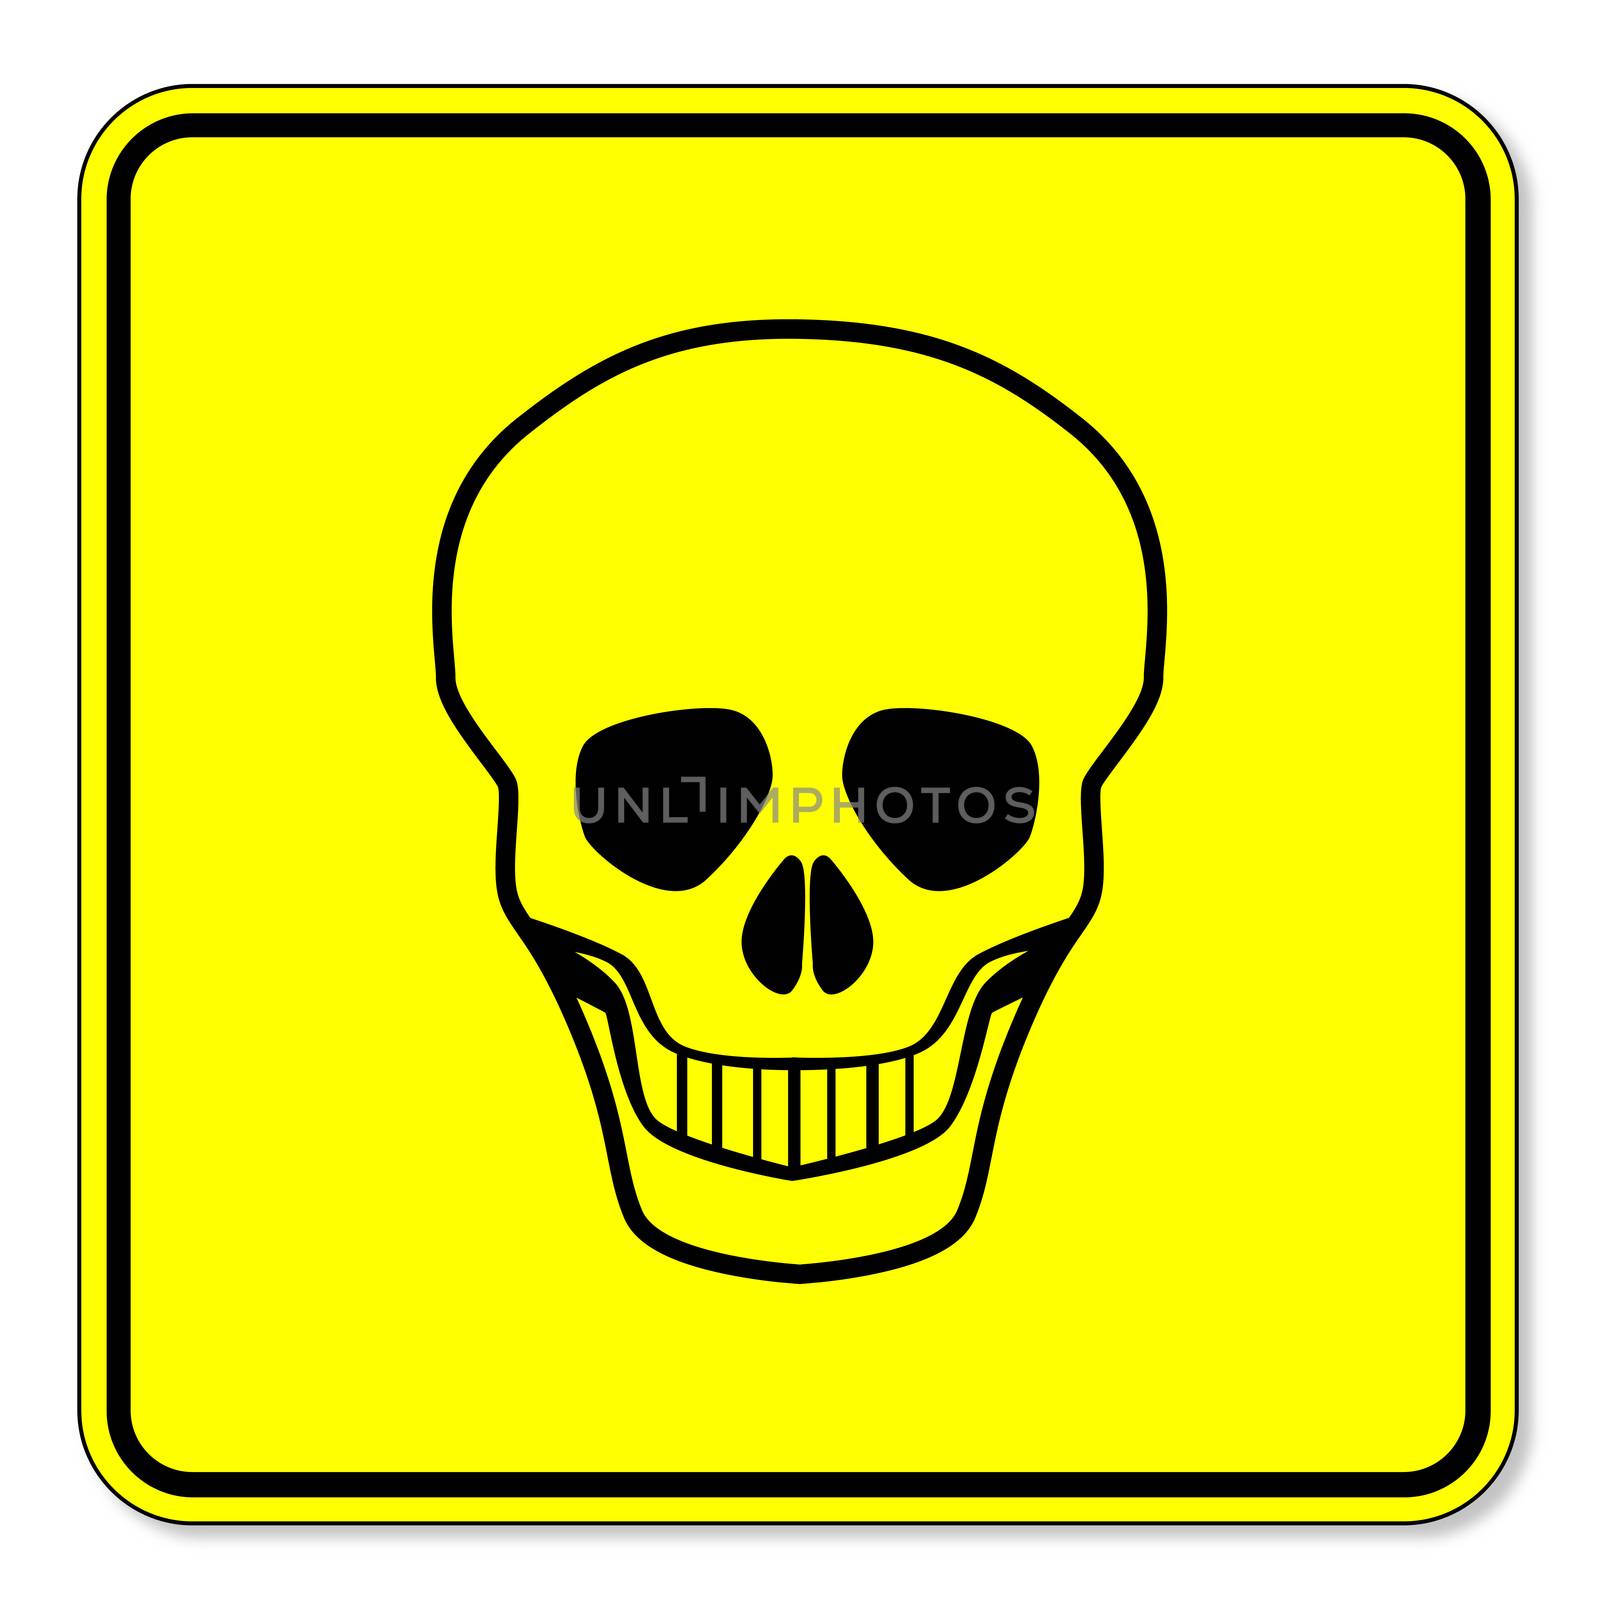 A yellow and black skull warning sign over a white background